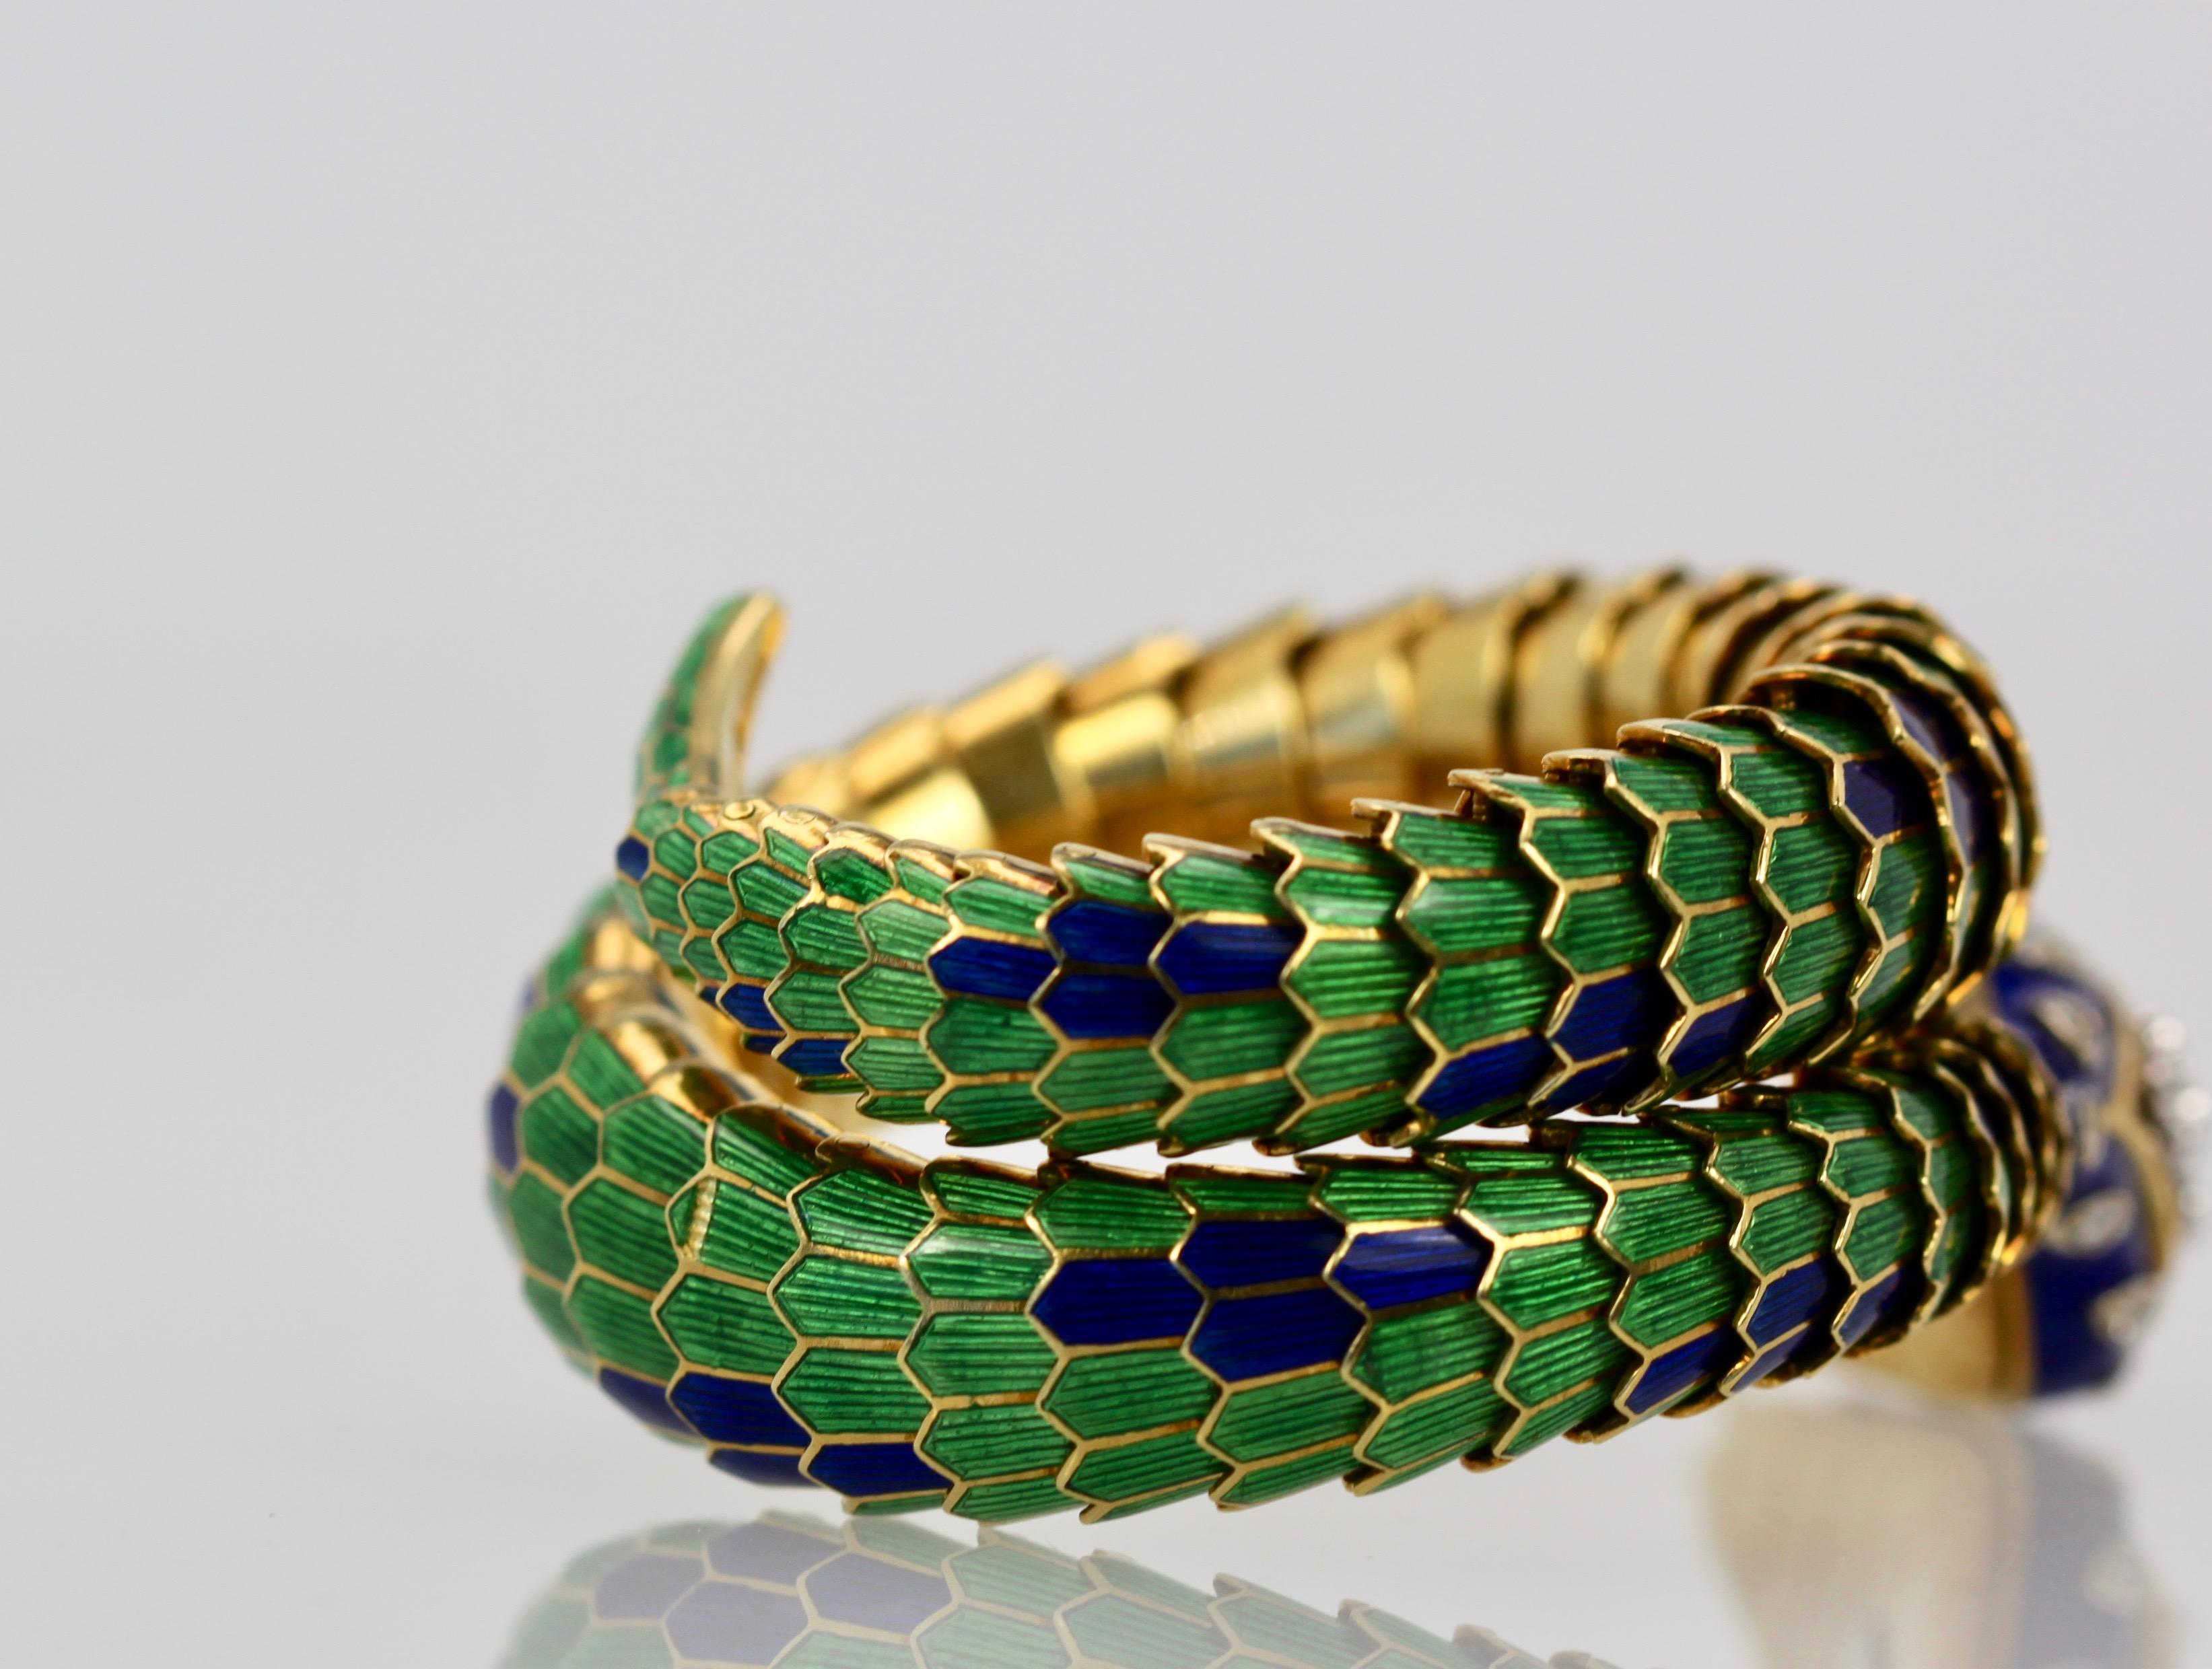 This enamel articulated Snake bracelet is by far my favorite.  This bracelet is knock down gorgeous.  As you can see I own lot's of snake bracelets but this one is the best I have ever had.  As for the articulated body it is perfect with only the